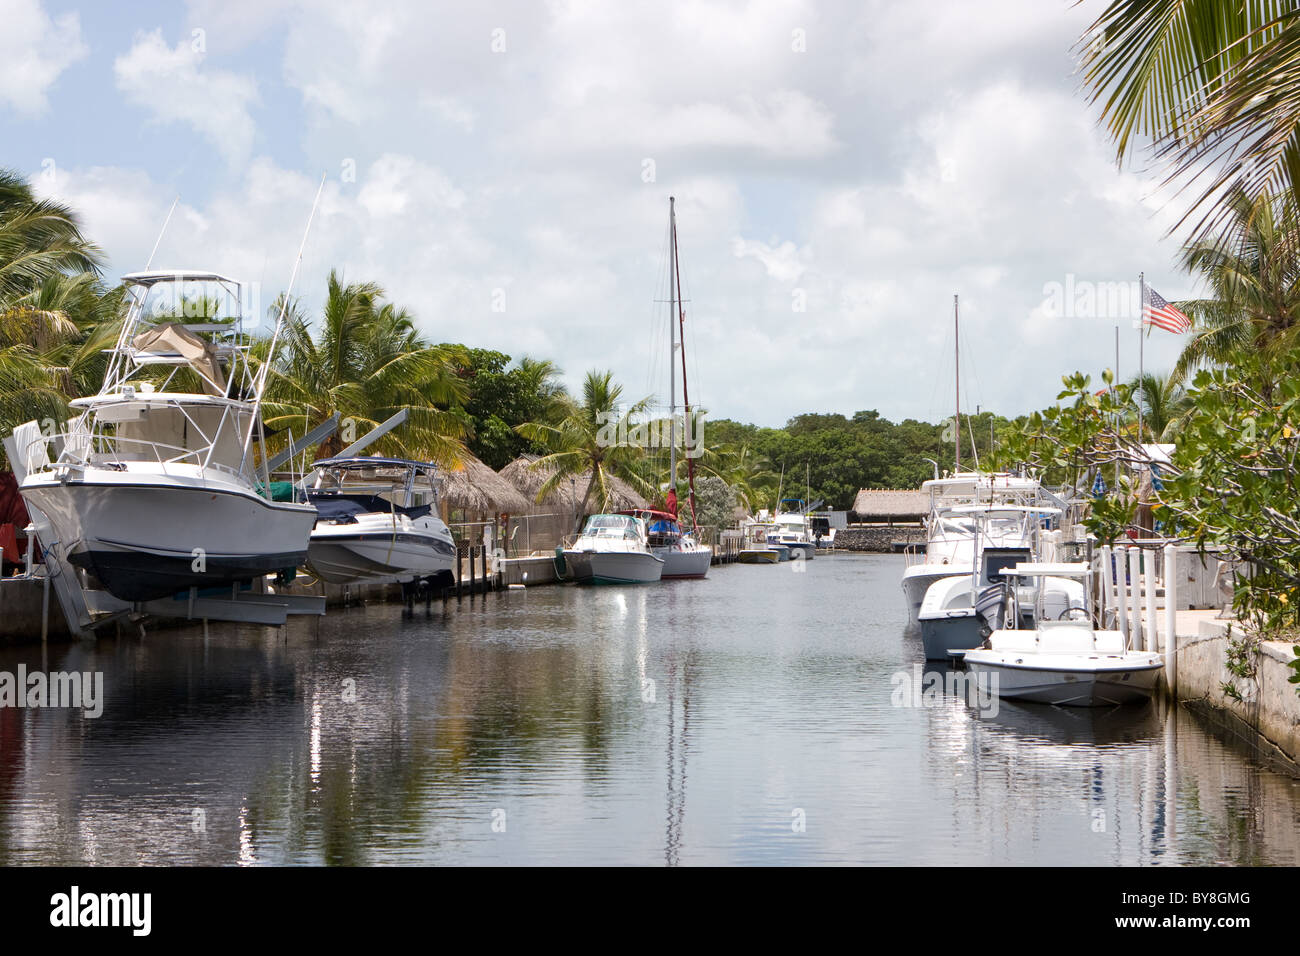 Pleasure boats line the canal in Key Largo, Florida. Stock Photo